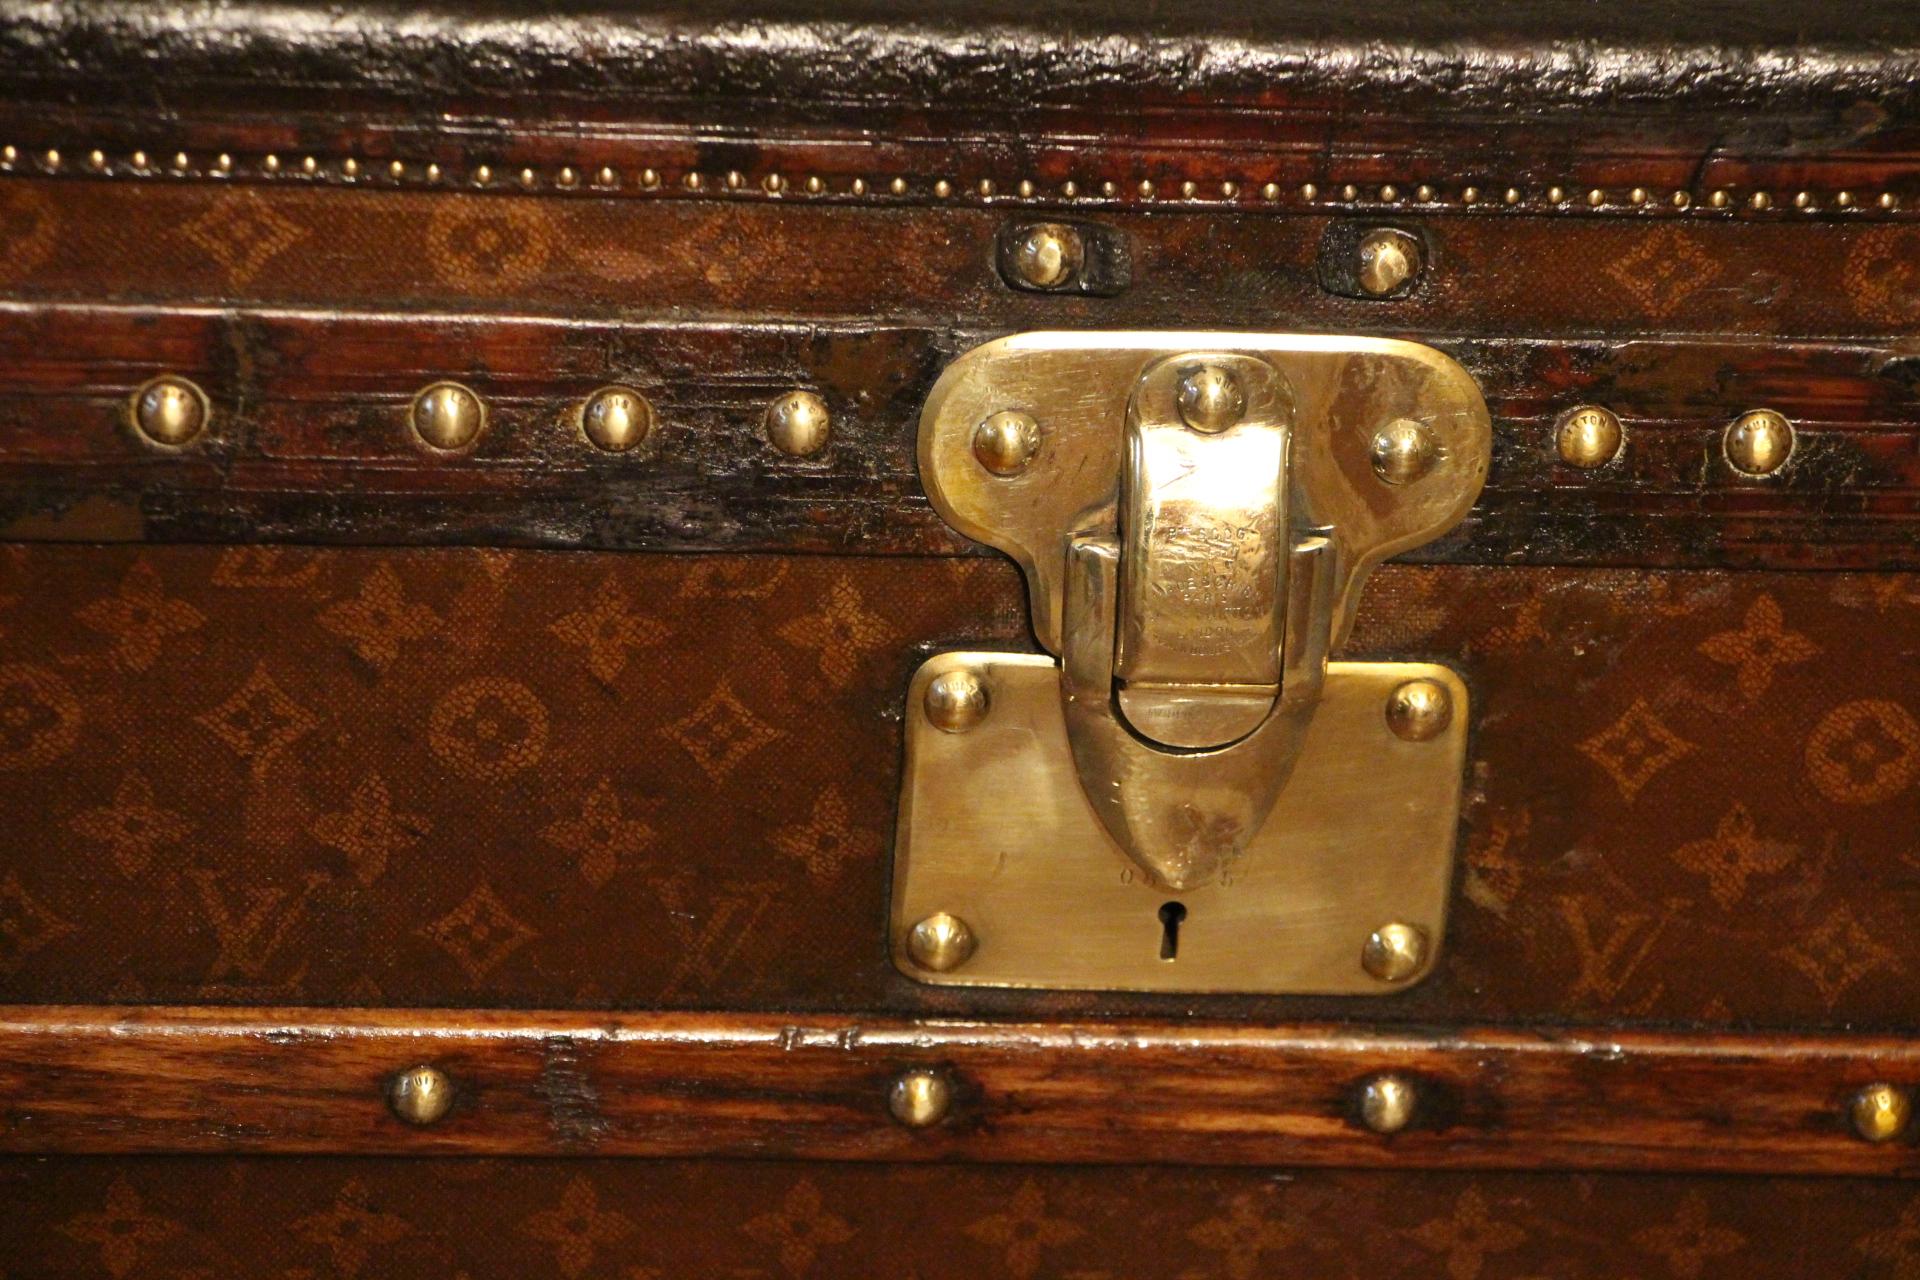 Extra large Louis Vuitton steamer trunk featuring monogram canvas, leather trim, stamped LV brass locks, stamped LV brass locks, brass corners and stamped LV studs. It has got a beautiful and warm patina. Painted French flag on each side. Very warm